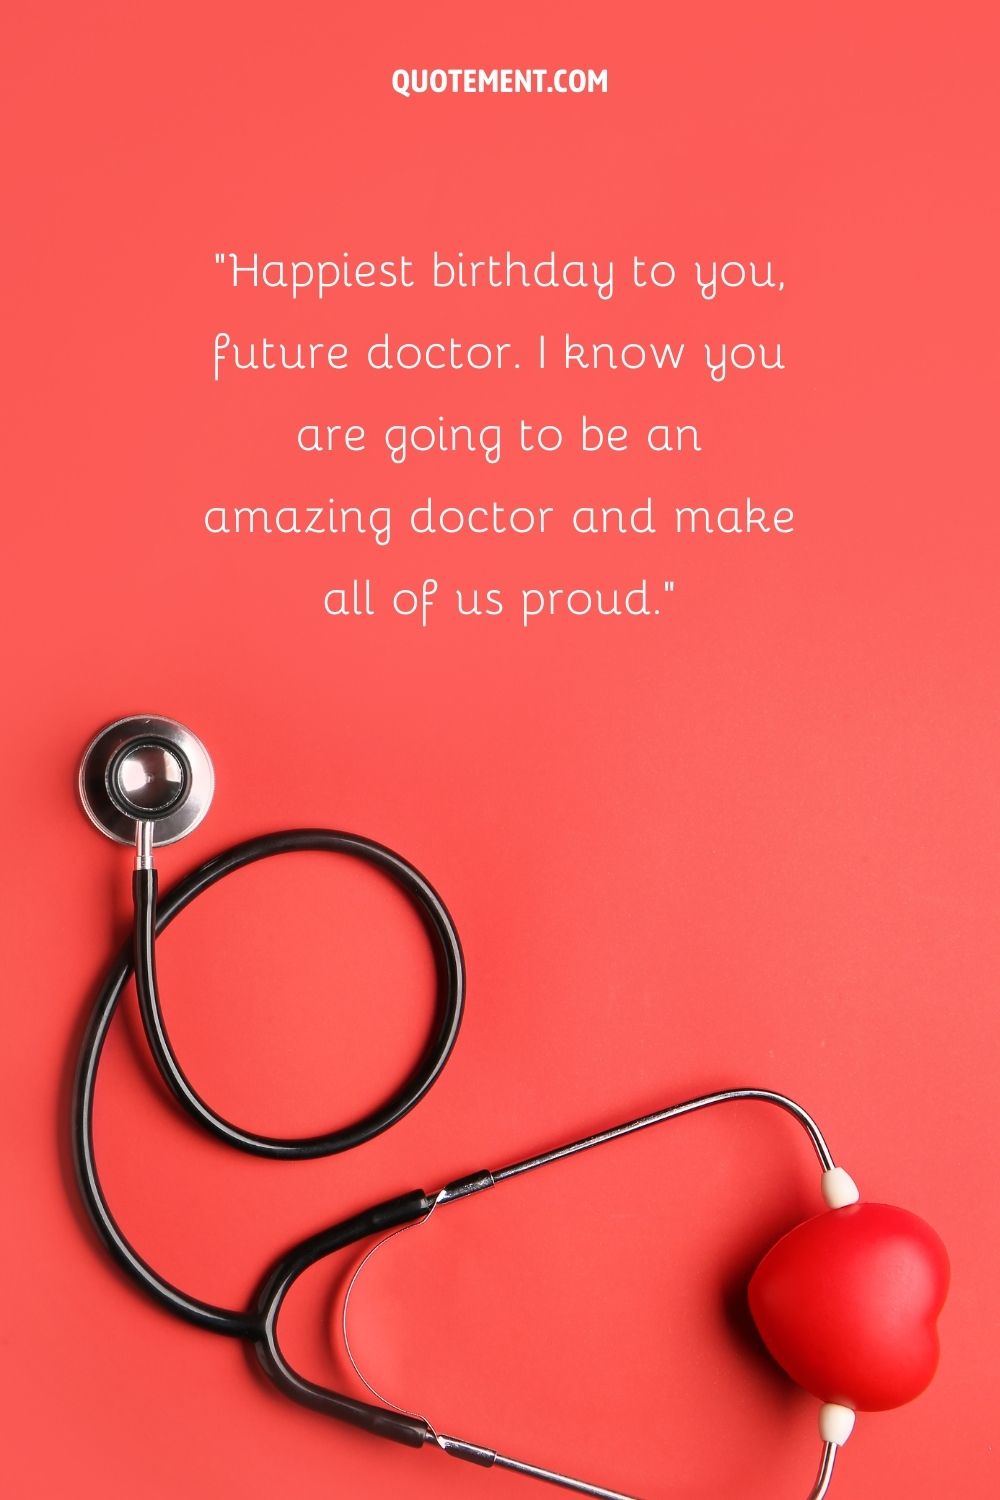 amazing future doctor birthday wish represented by a stethoscope